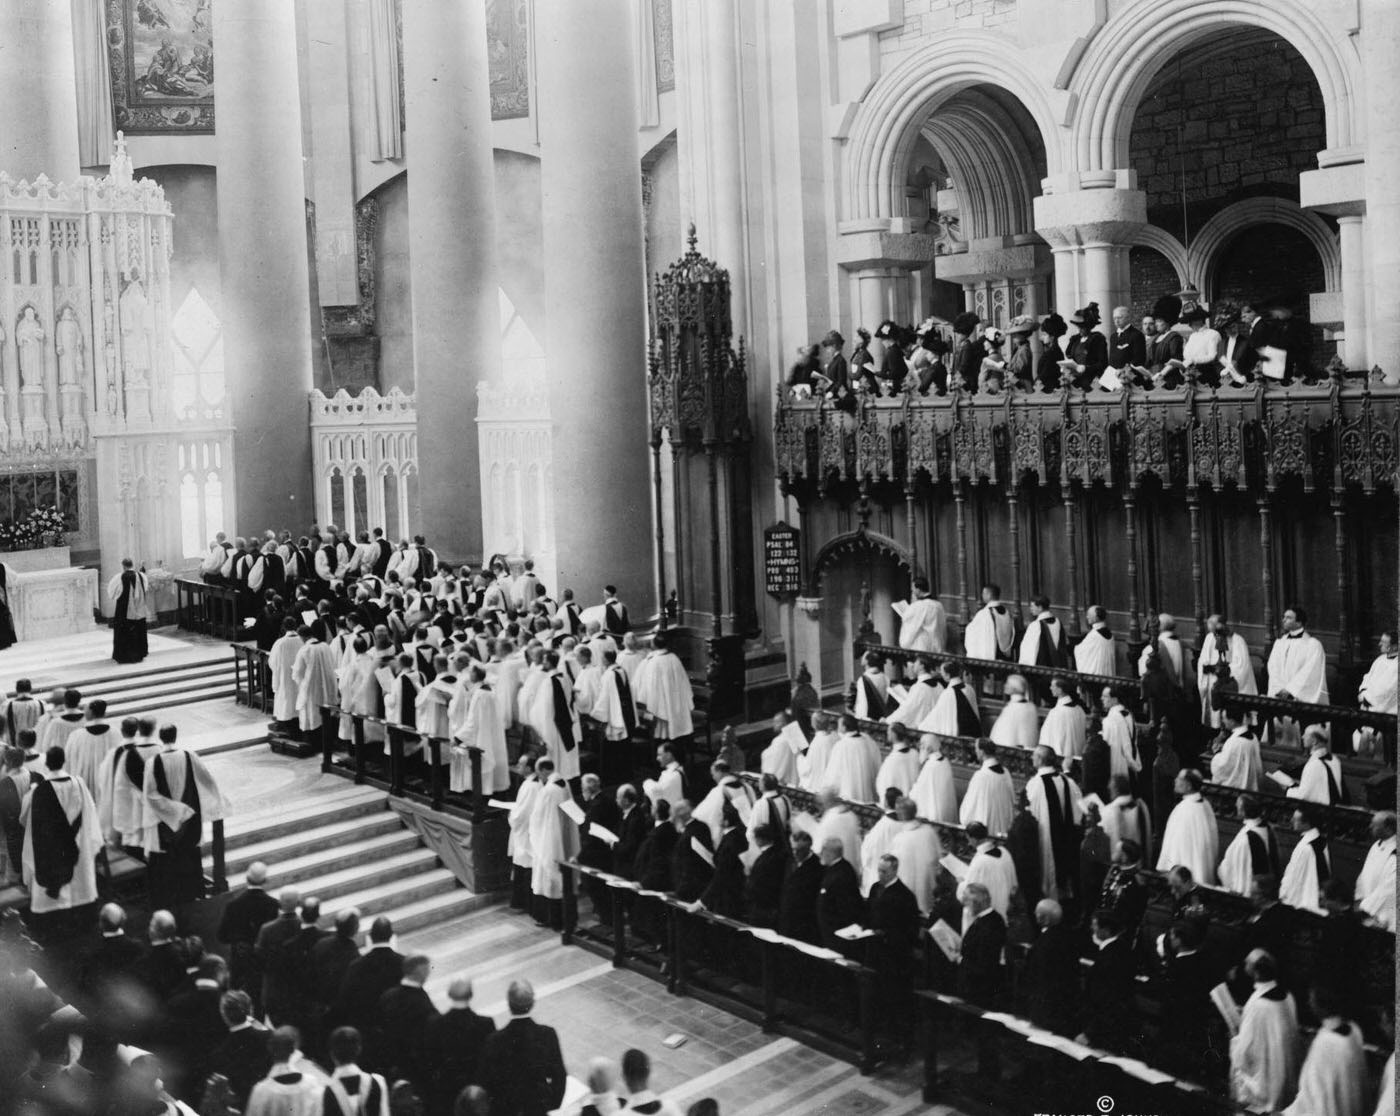 Consecration Of The Choir And Chapels Of The Cathedral Of St. John The Divine, People In Church, New York City, Circa 1911